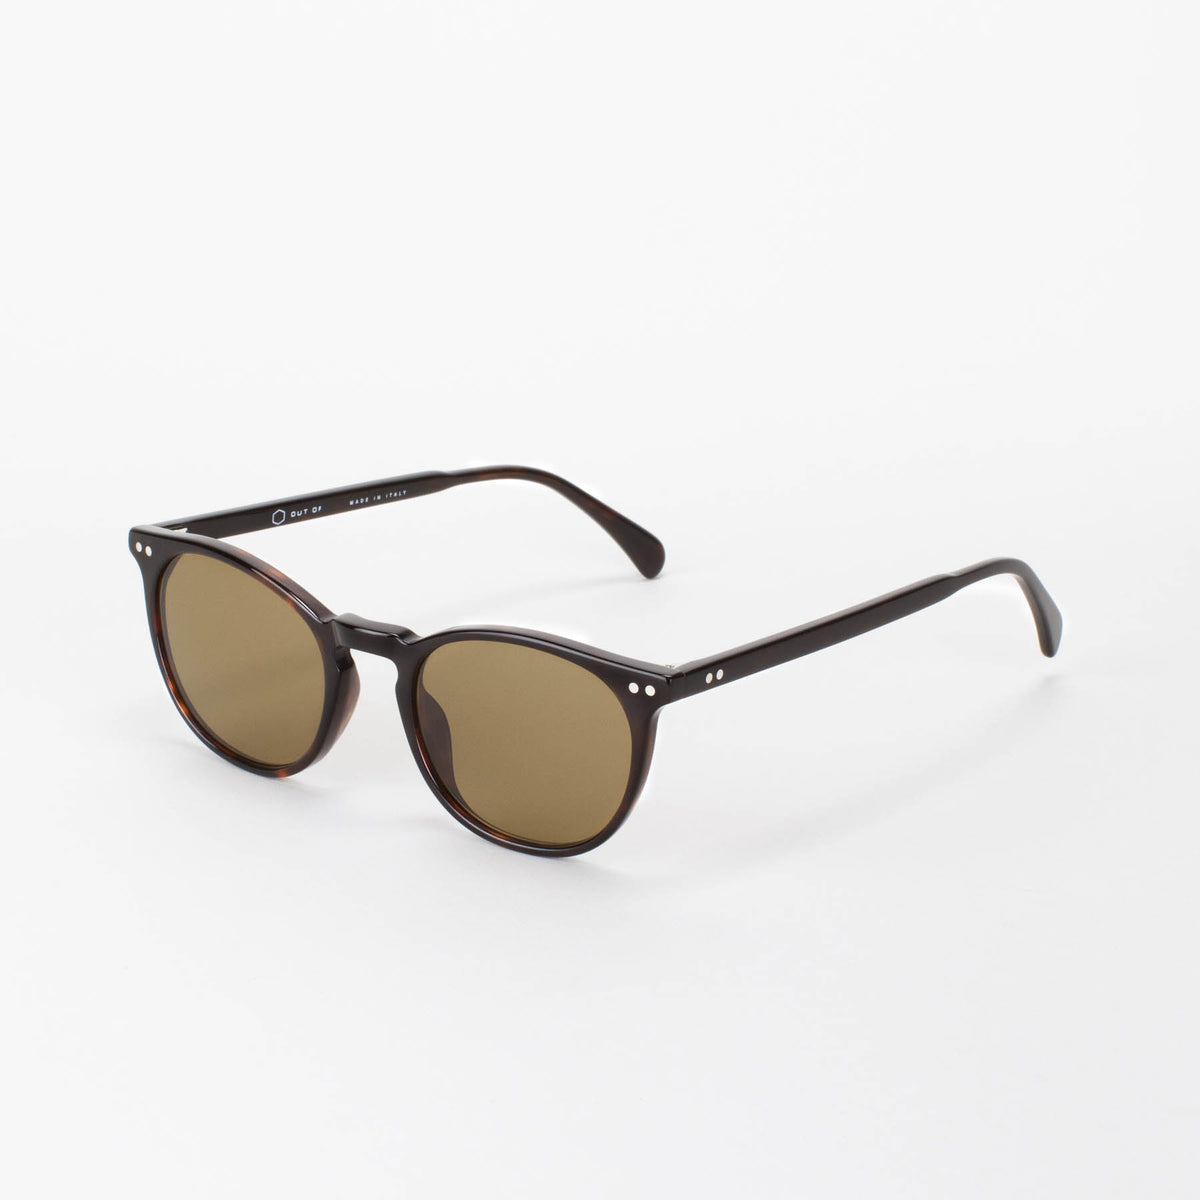 'OUT OF' MODENA TURTLE BROWN FASHION SUNGLASSES